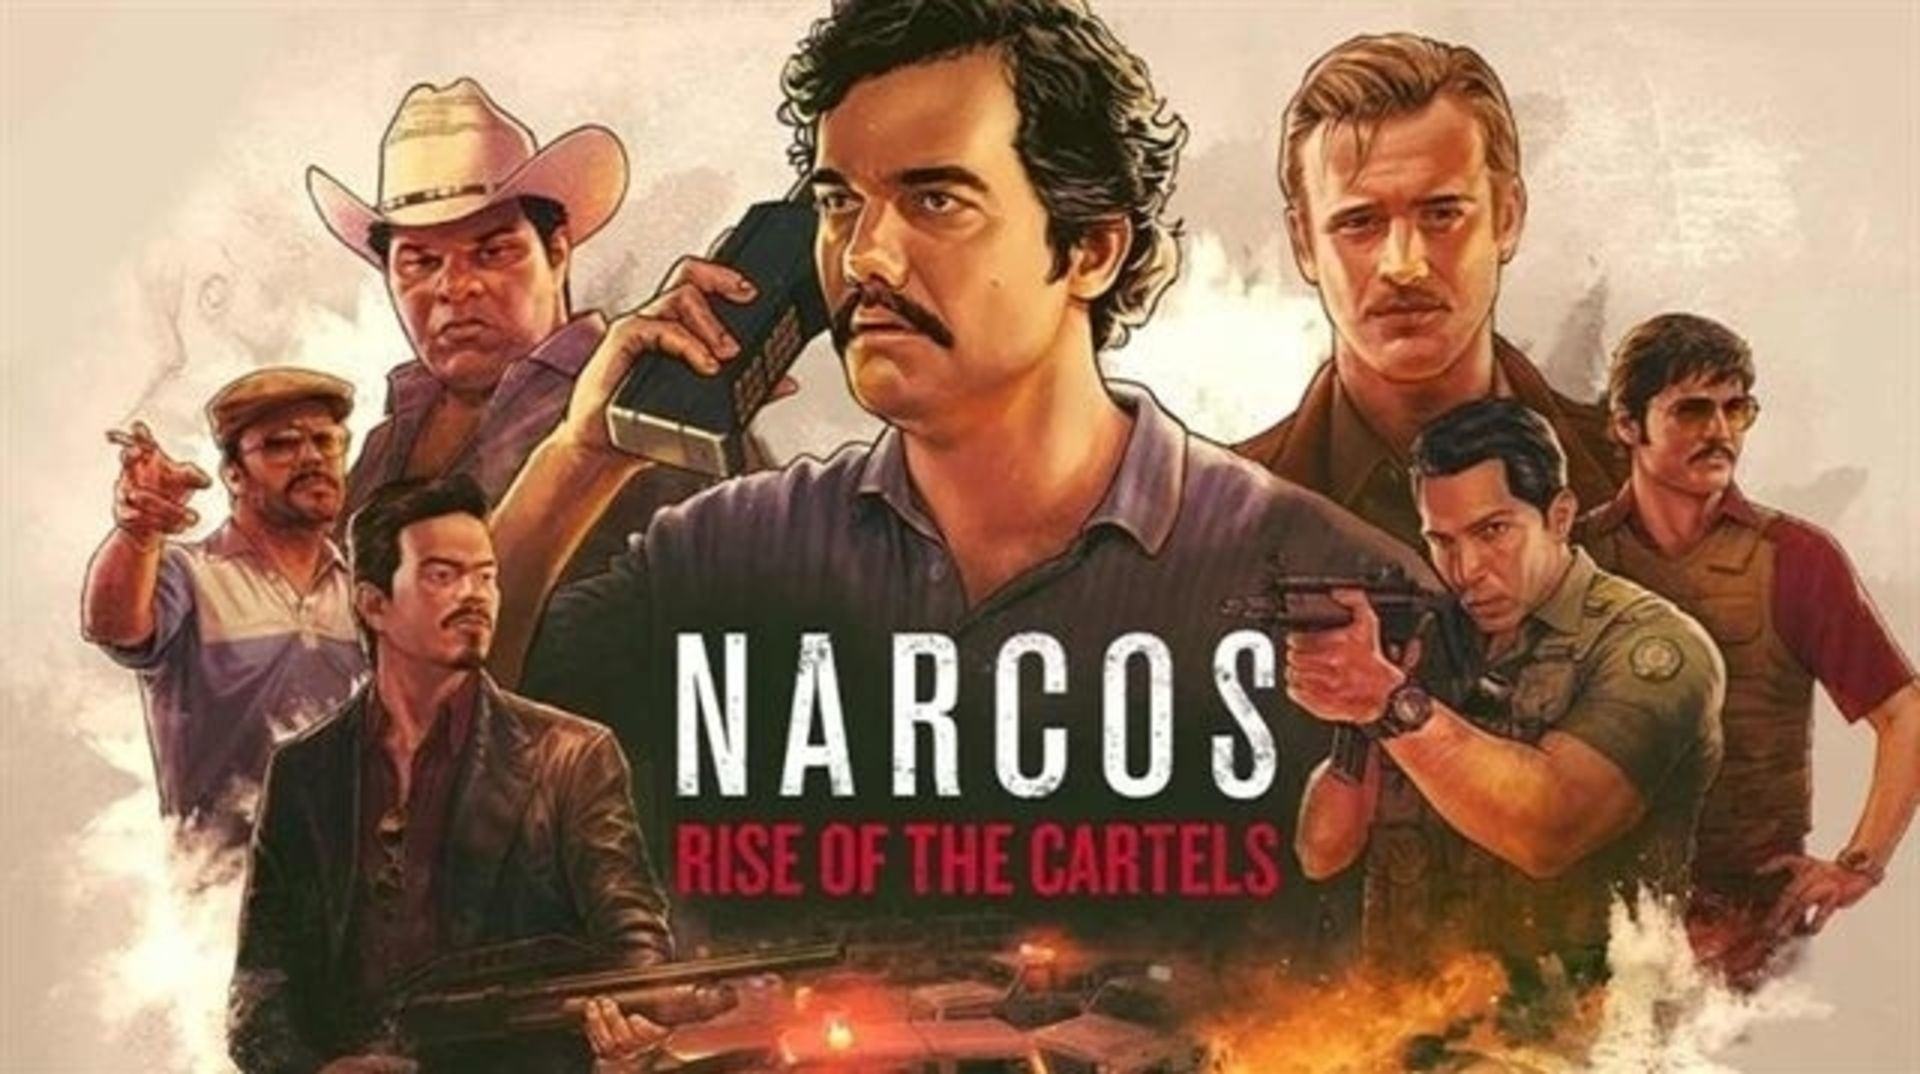 Narcos: Rise of the Cartels - la recensione 8